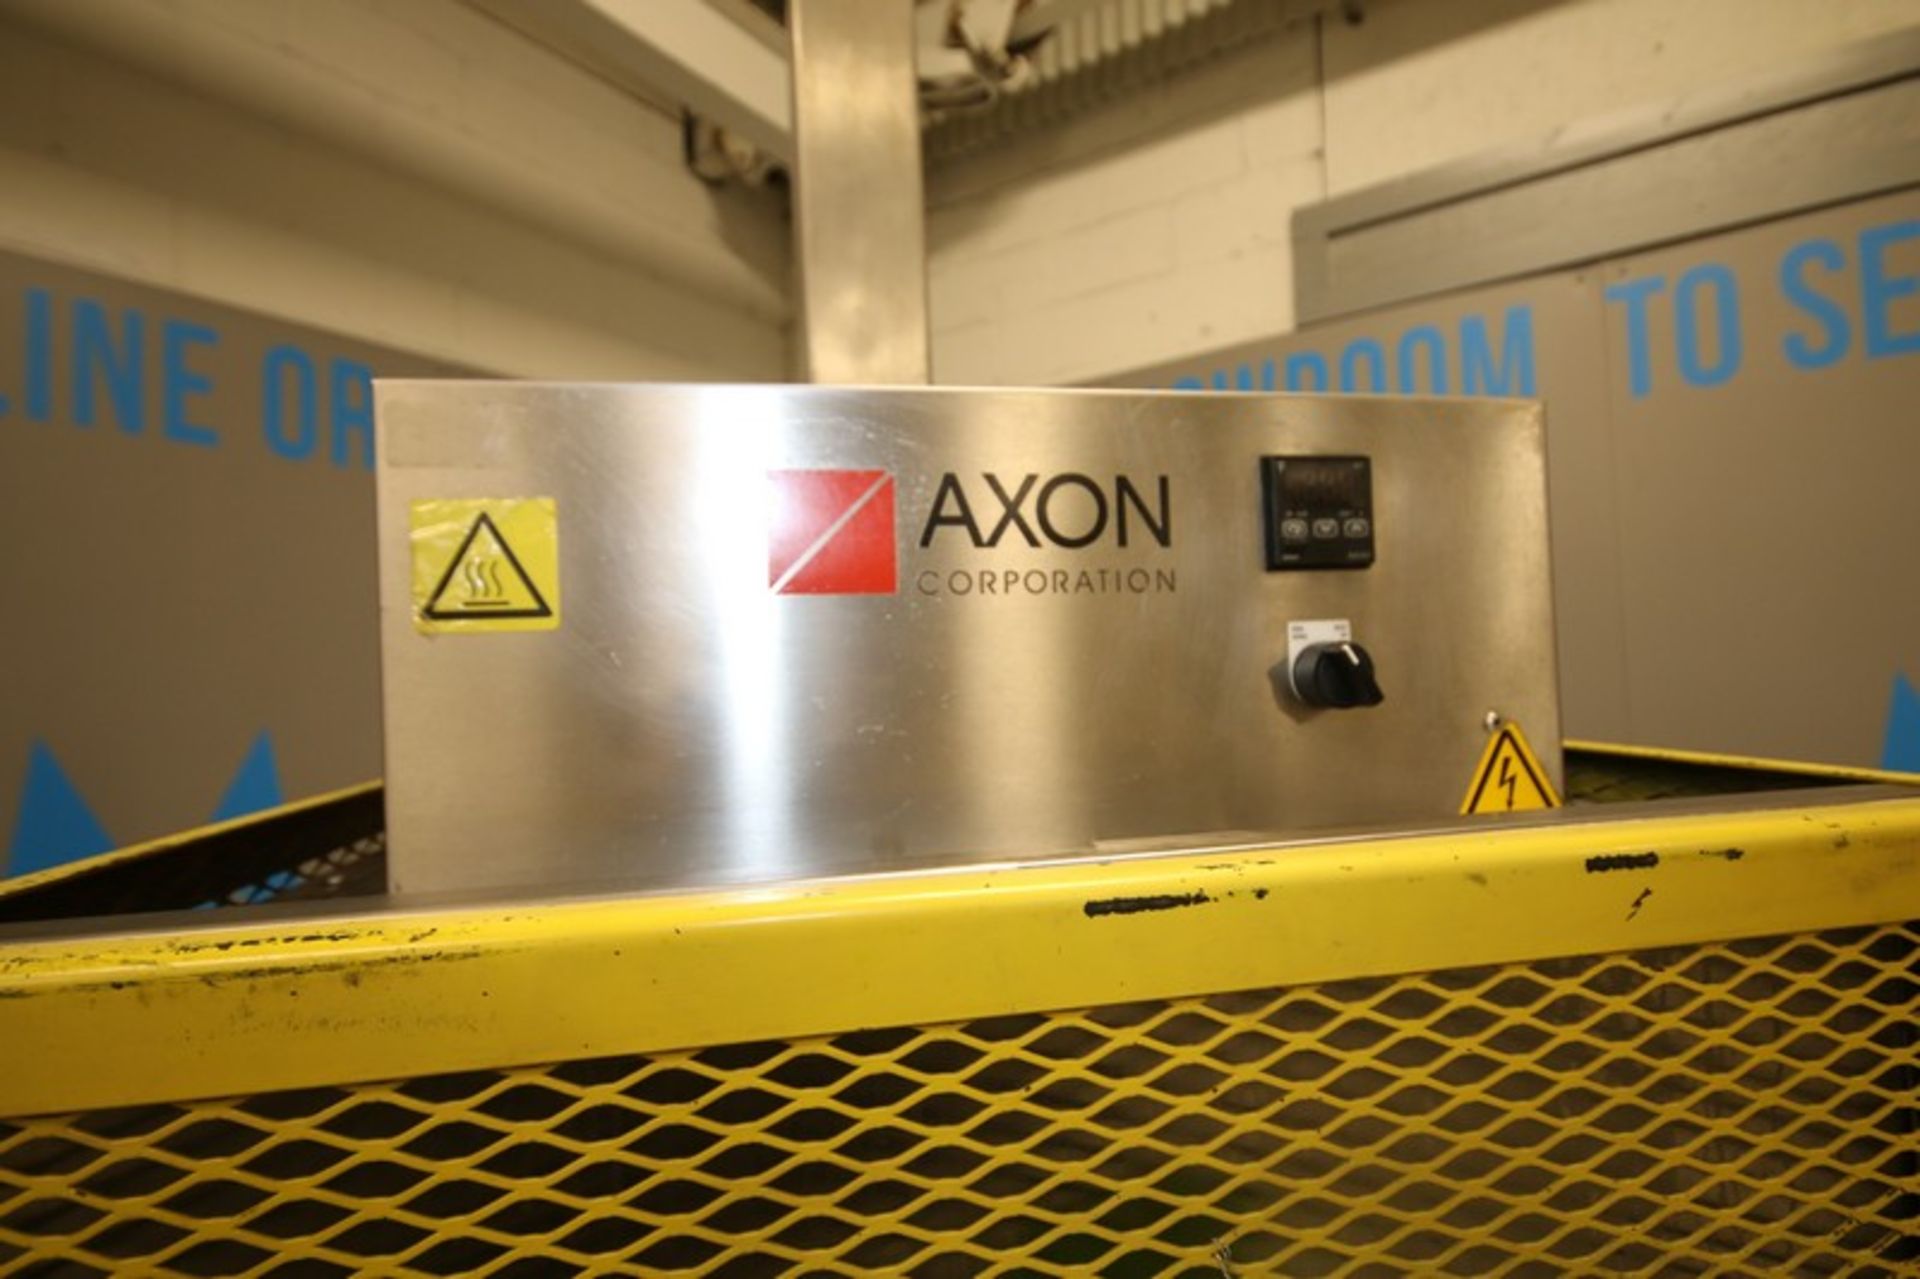 Axon Electric S/S Shrink Sleeve Heat Tunnel, Model E7 24 SRB2, SN E-051139, with 7" W x 7" H - Image 5 of 11